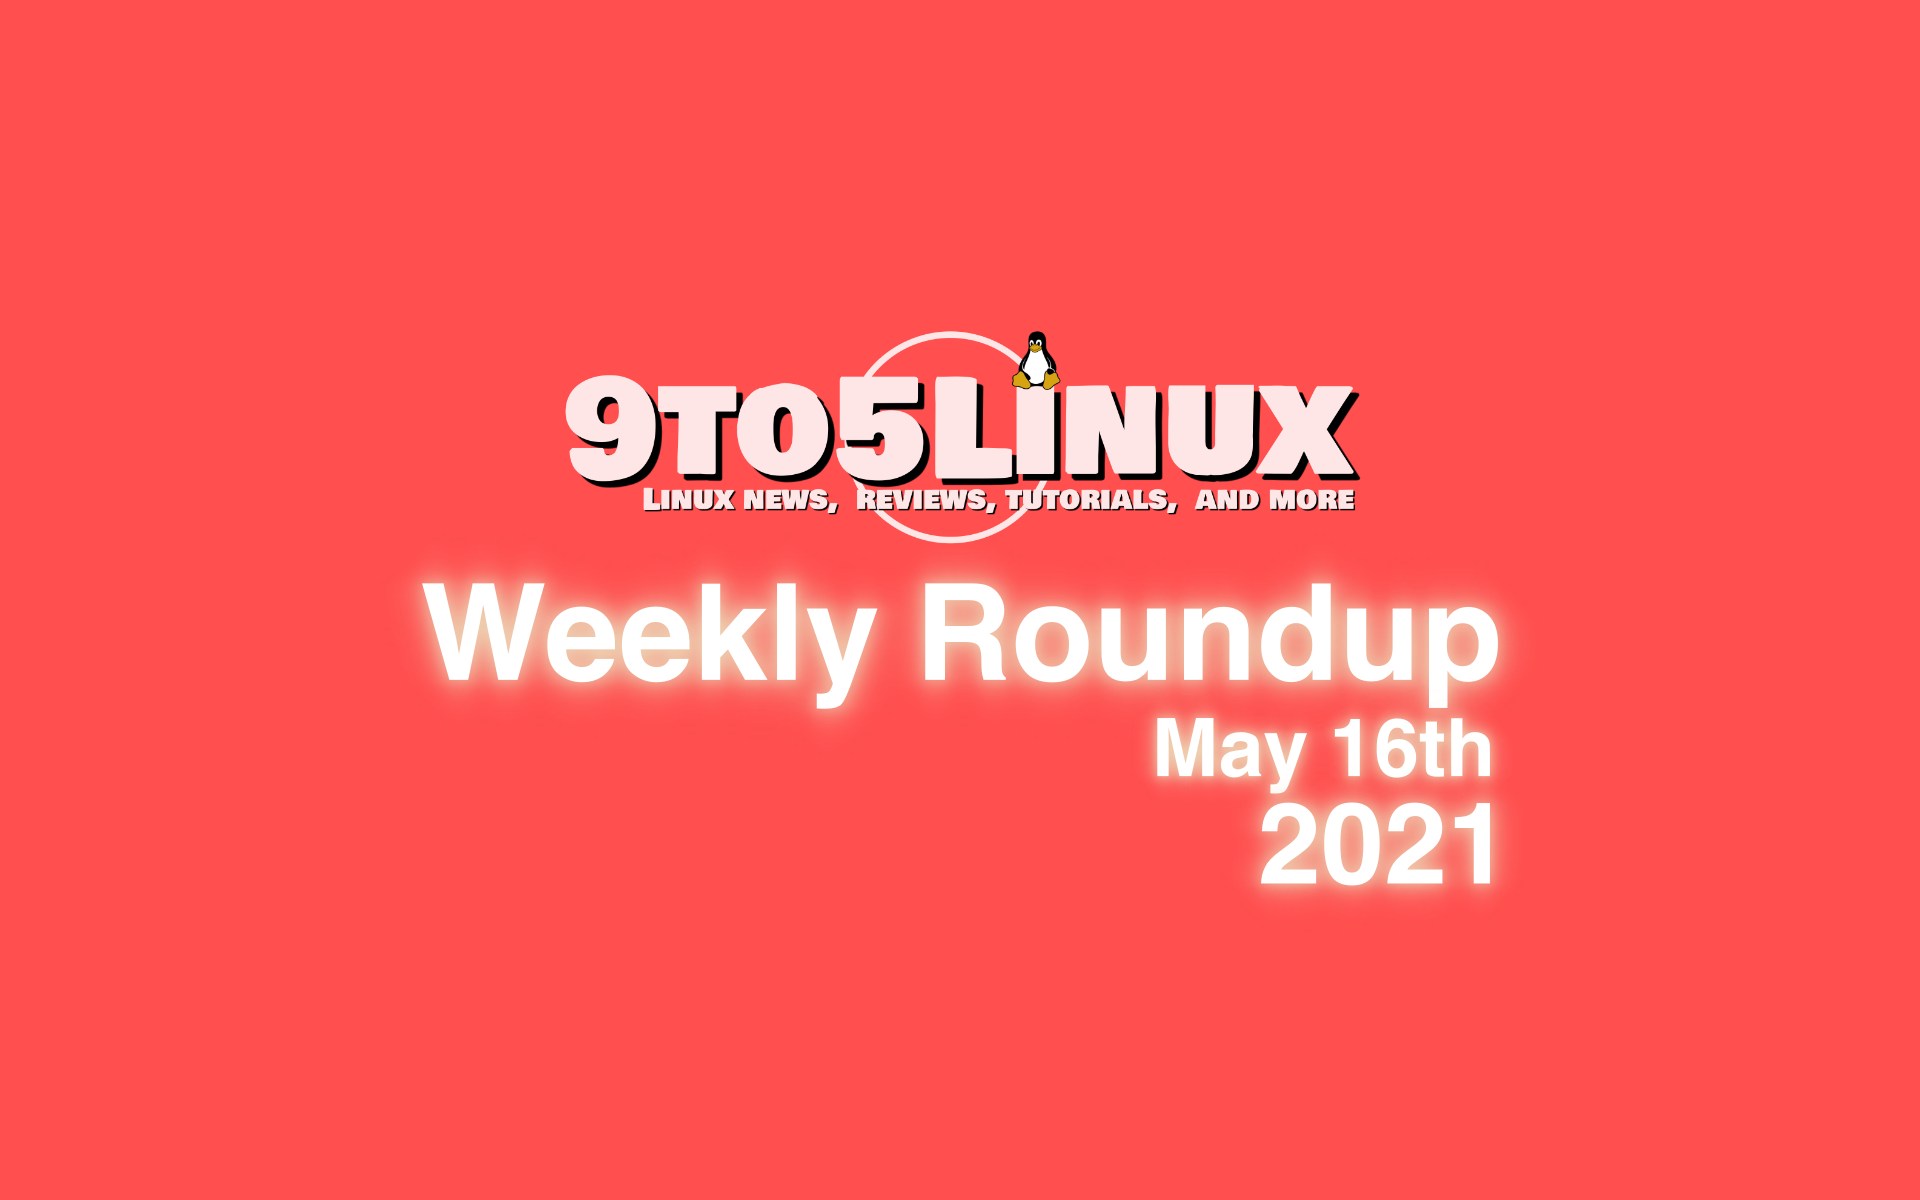 9to5Linux Weekly Roundup: May 16th, 2021